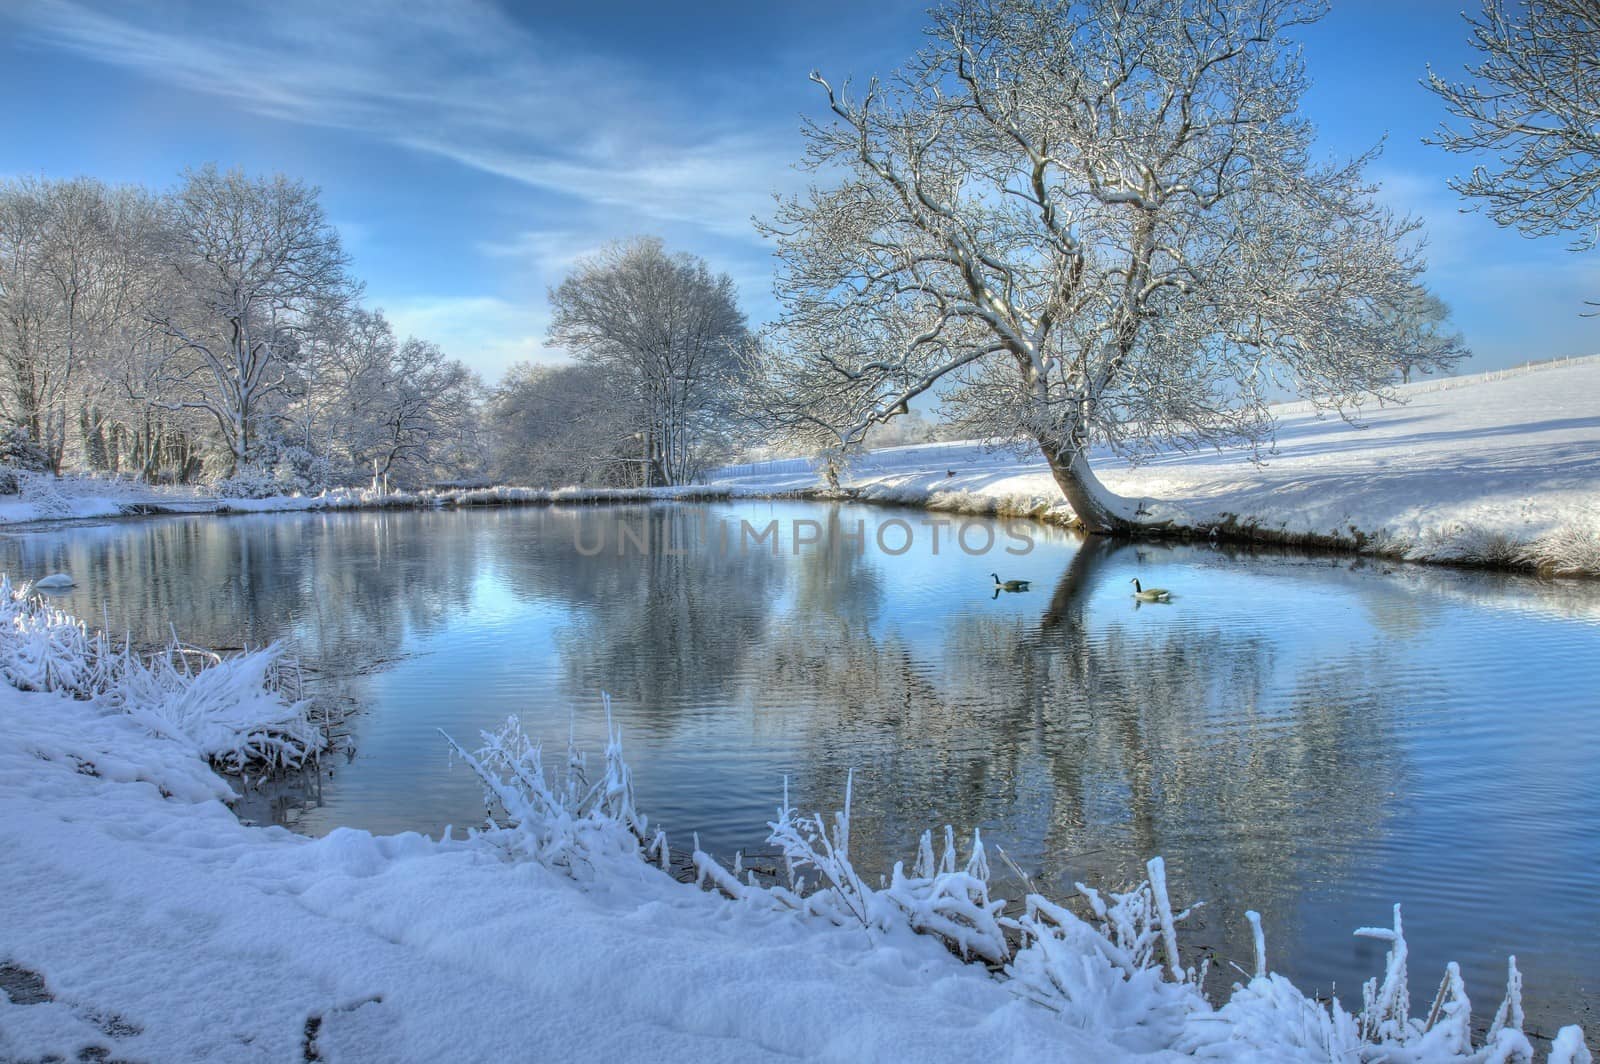 Winter lake, Worcestershire by andrewroland